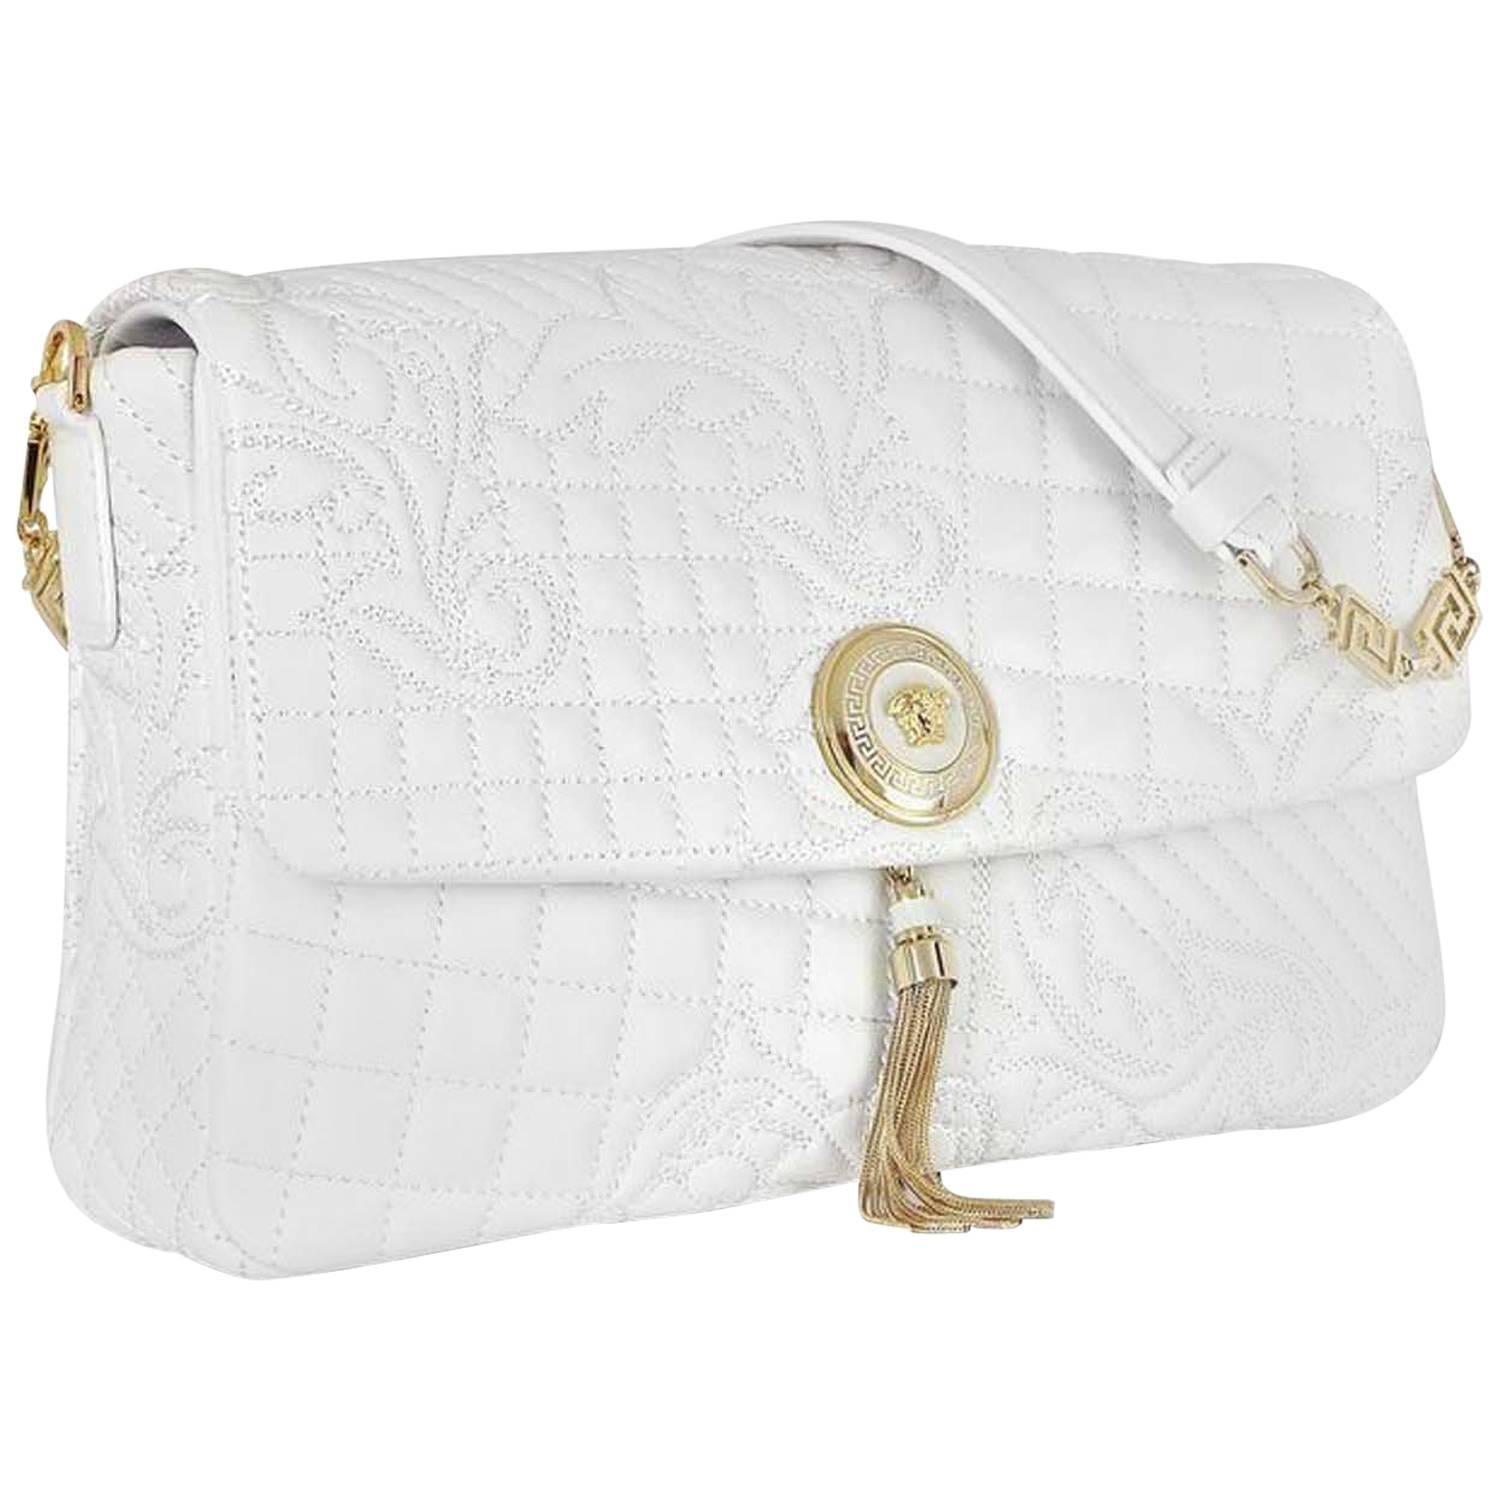 New Versace White Vanitas Barocco Quilted Nappa Leather Handbag with Gold Medusa